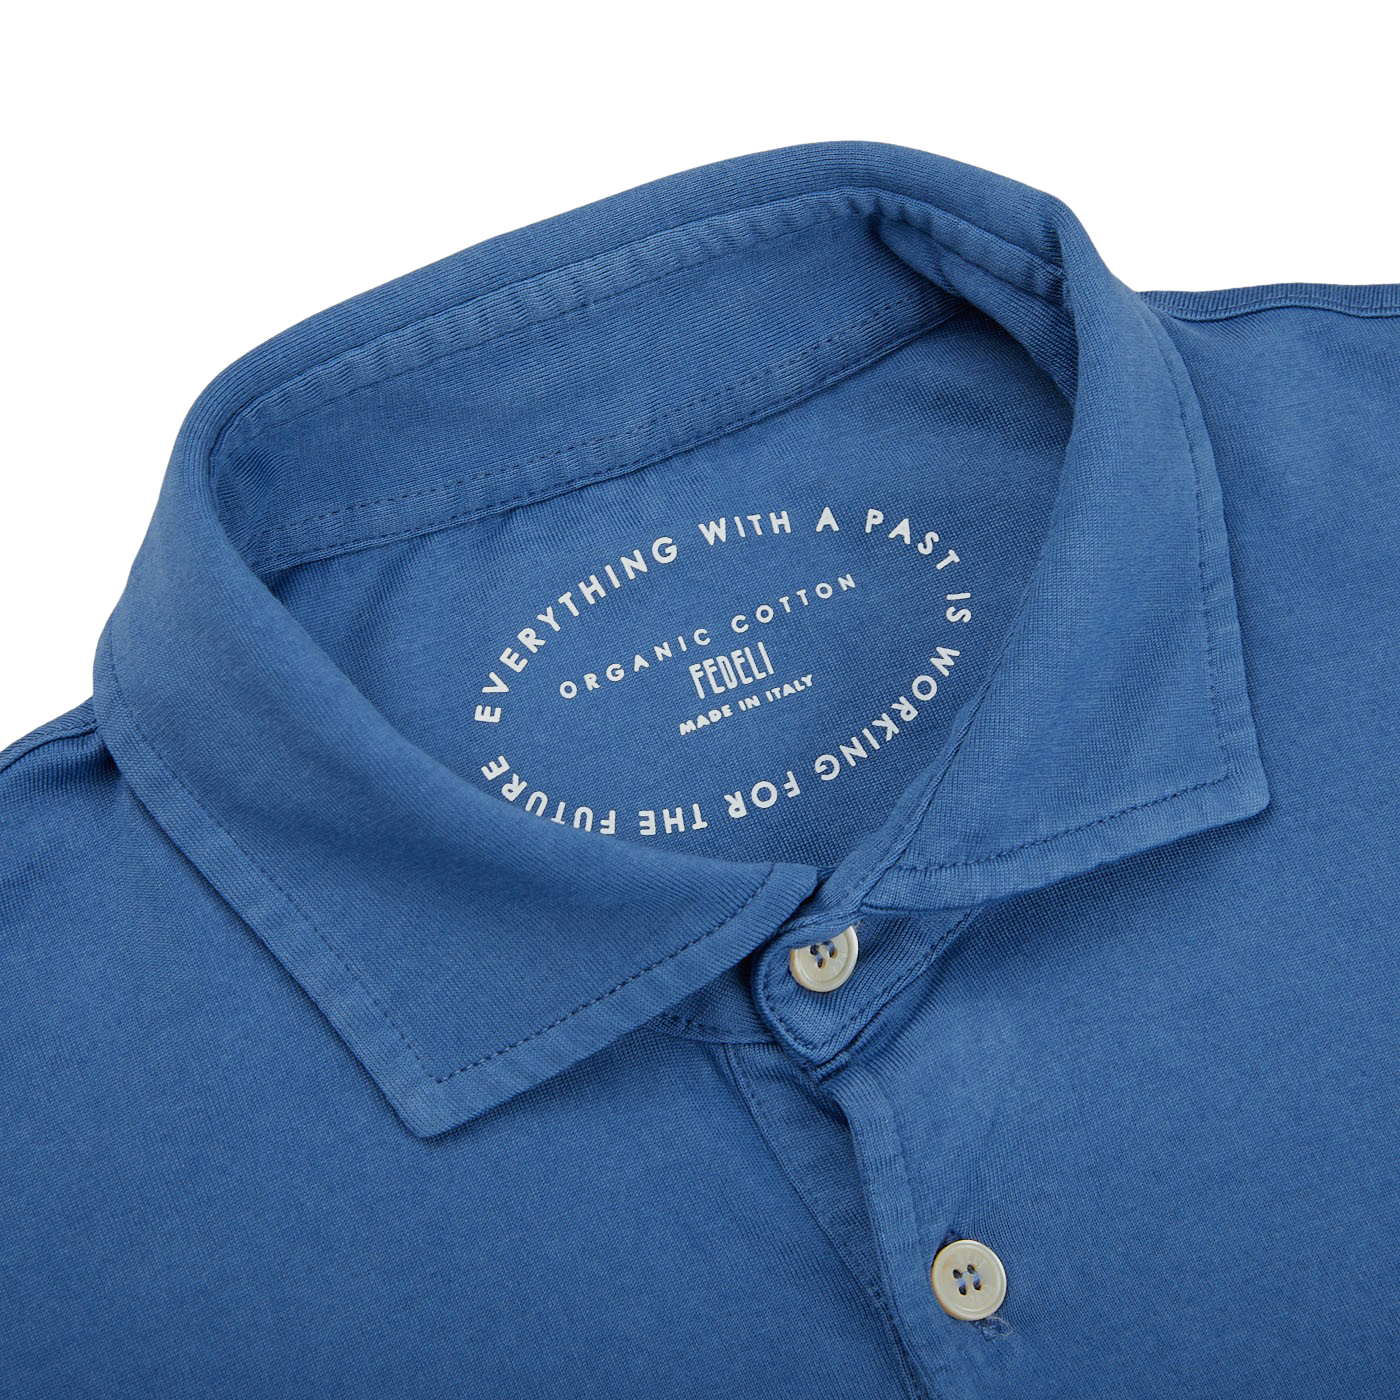 The collar of a Light Blue Organic Cotton LS Polo Shirt by Fedeli.